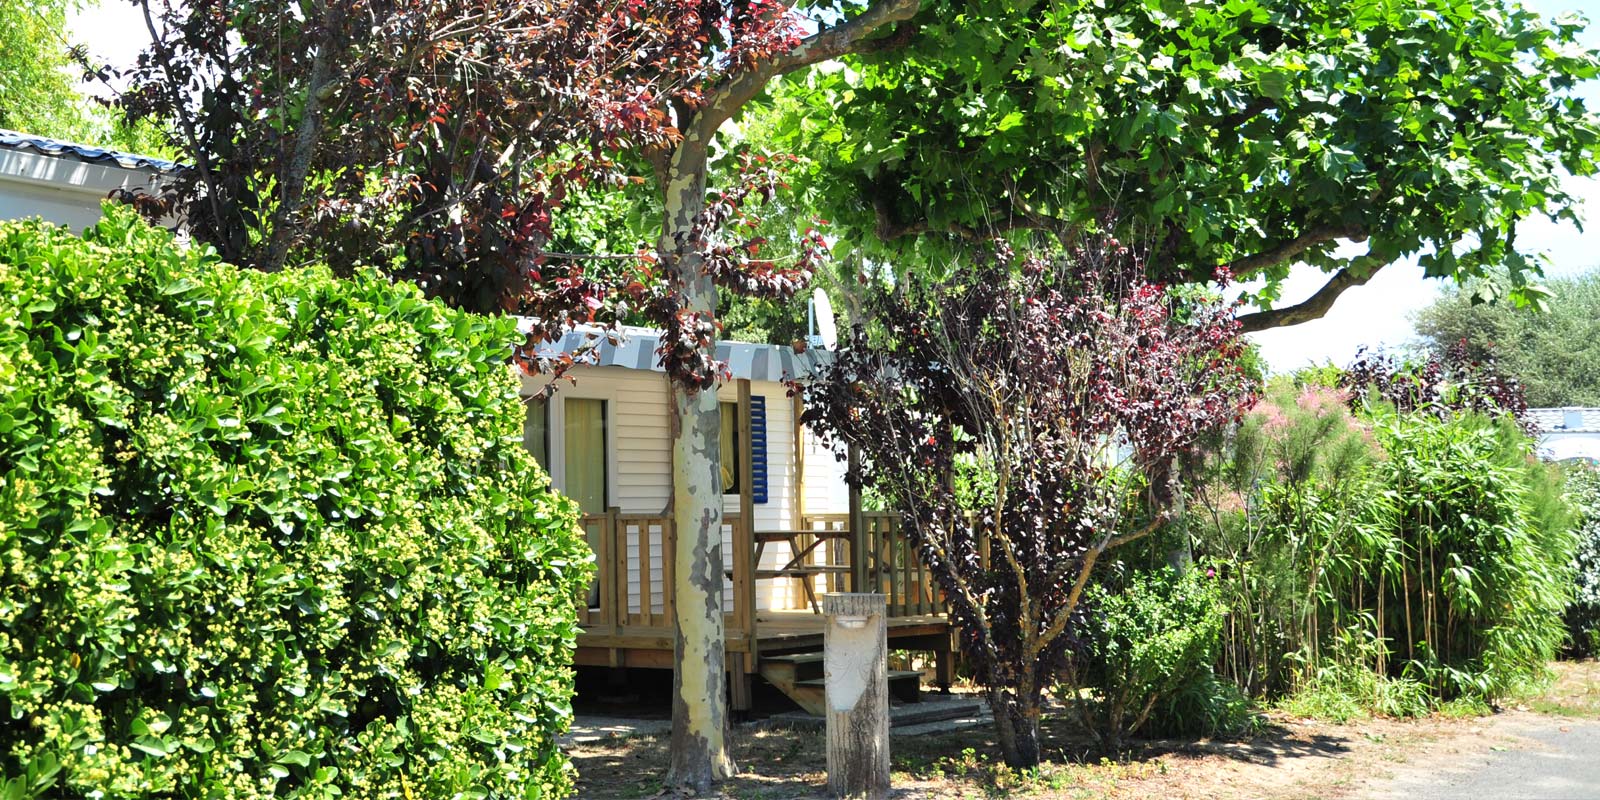 Trees in front of a mobile home at the campsite park in Saint-Hilaire